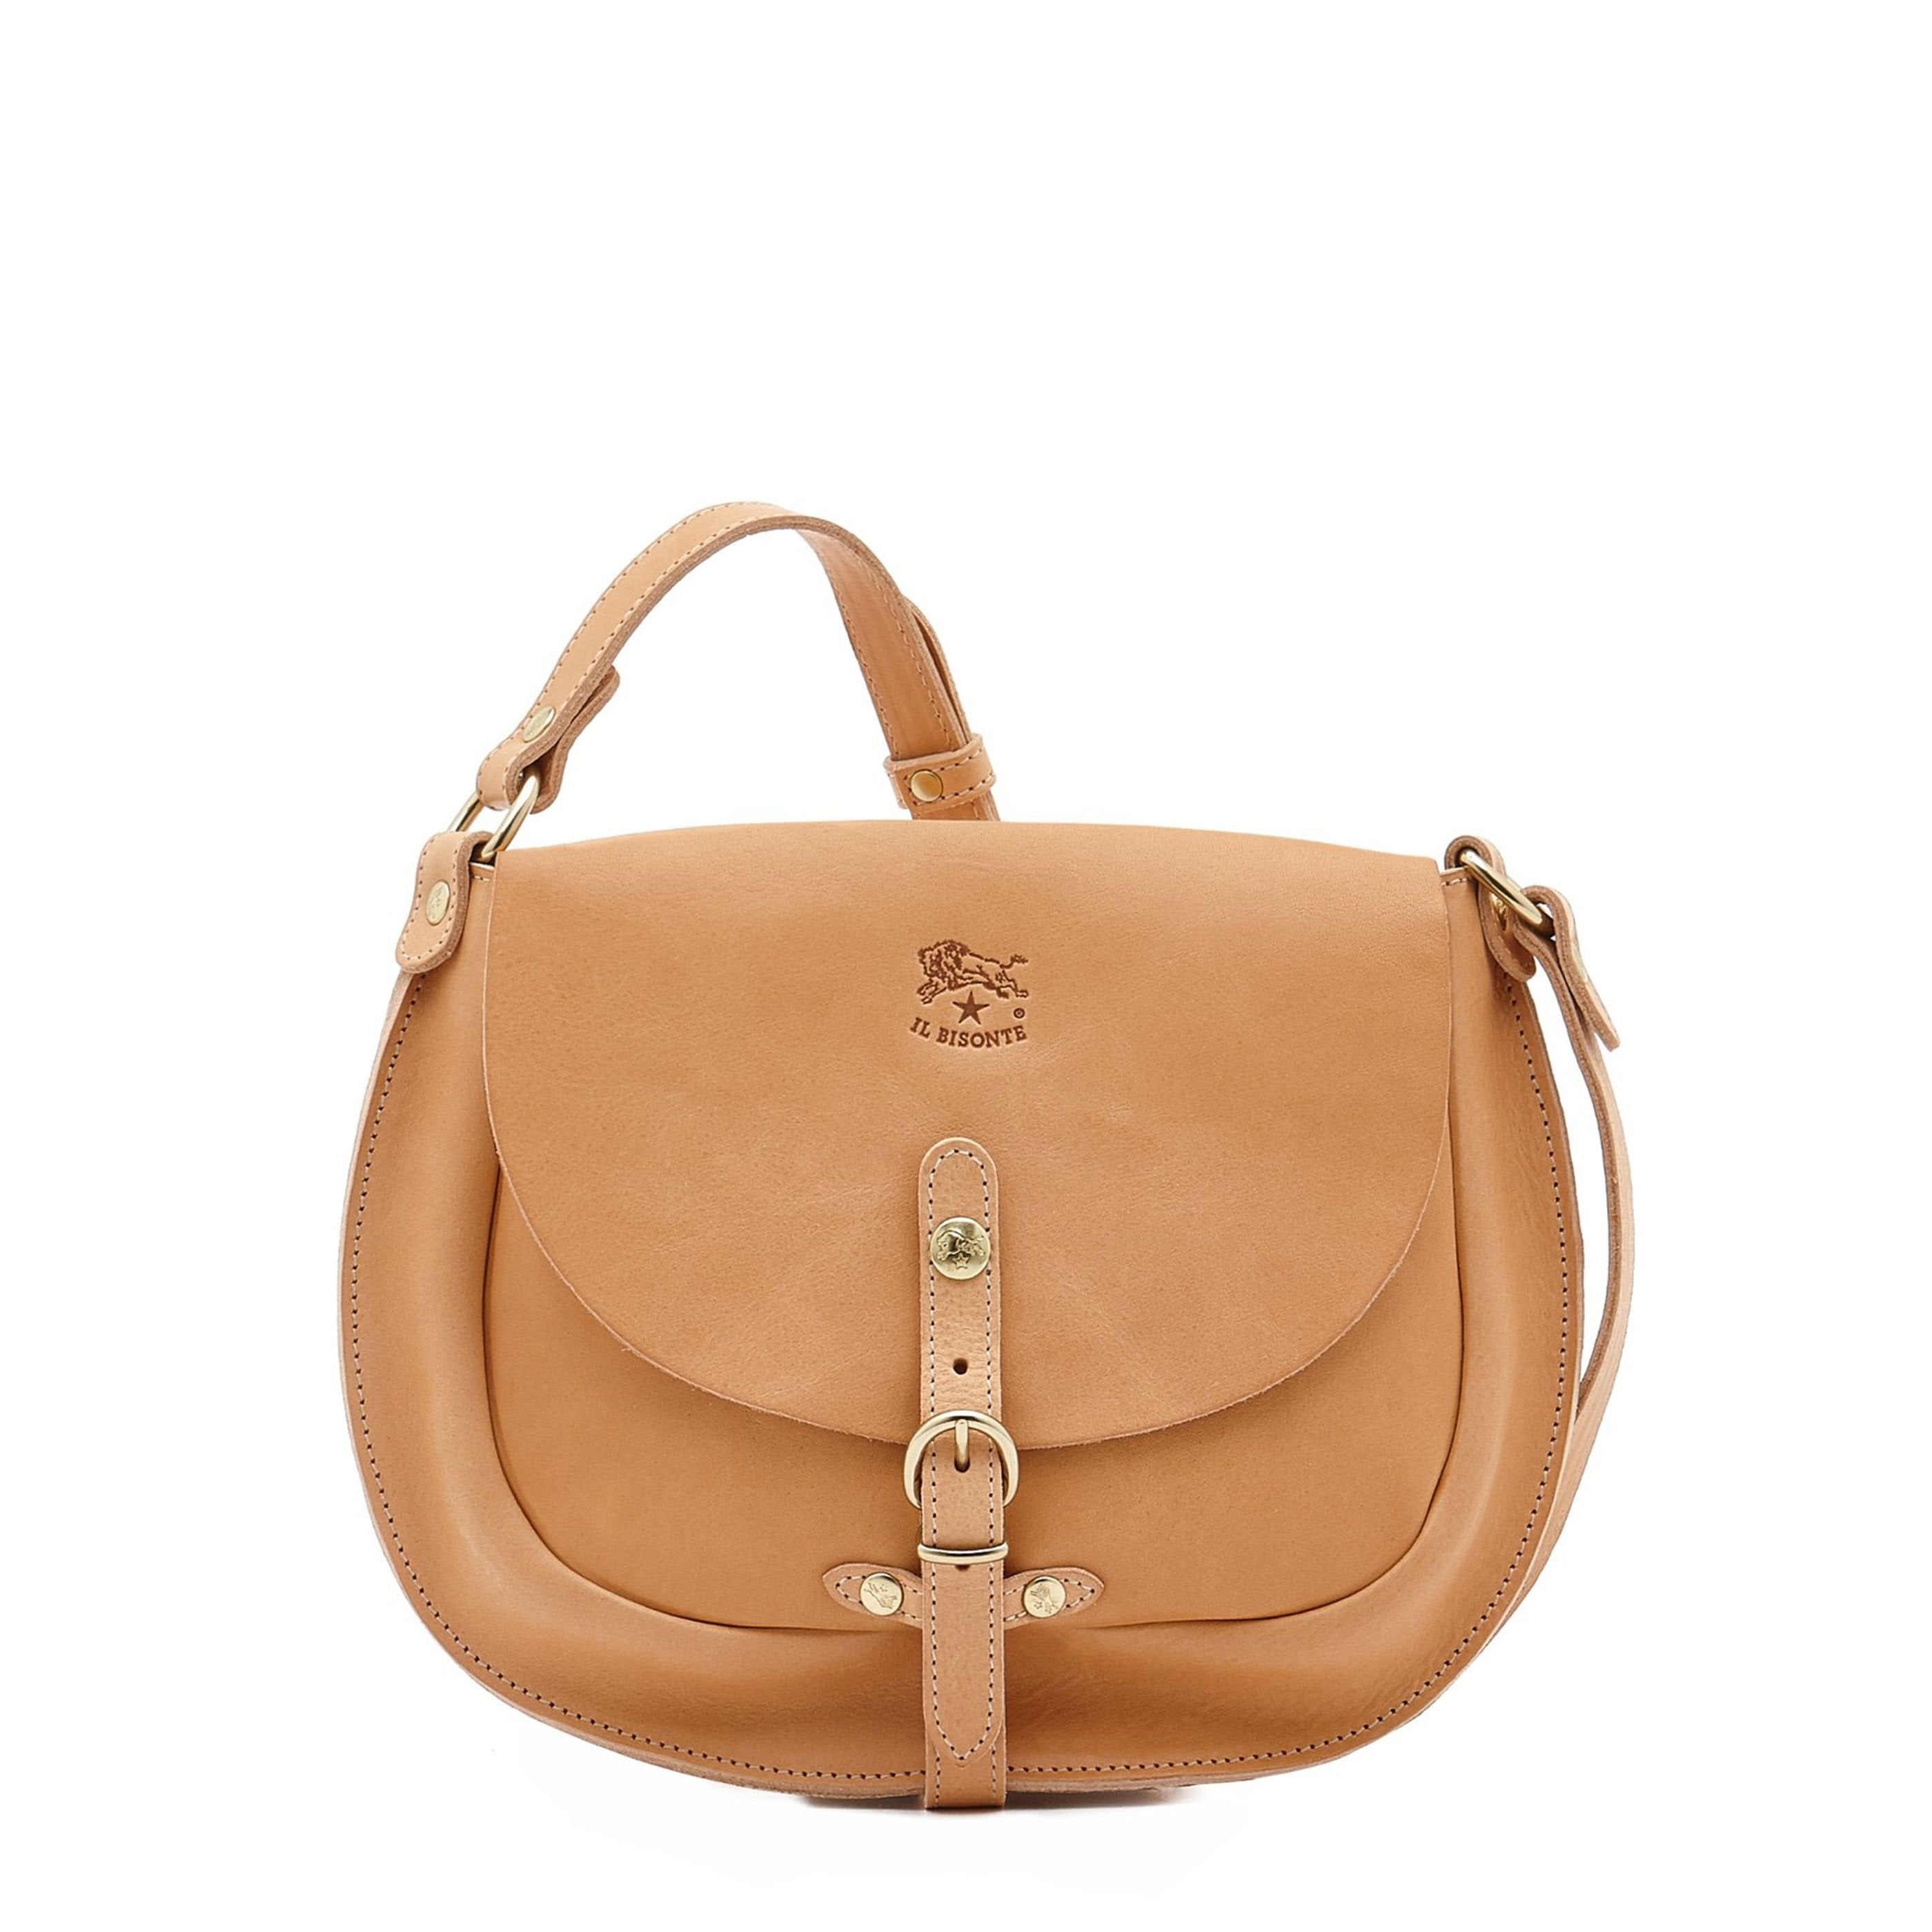 Buy a natural leather handbag for women